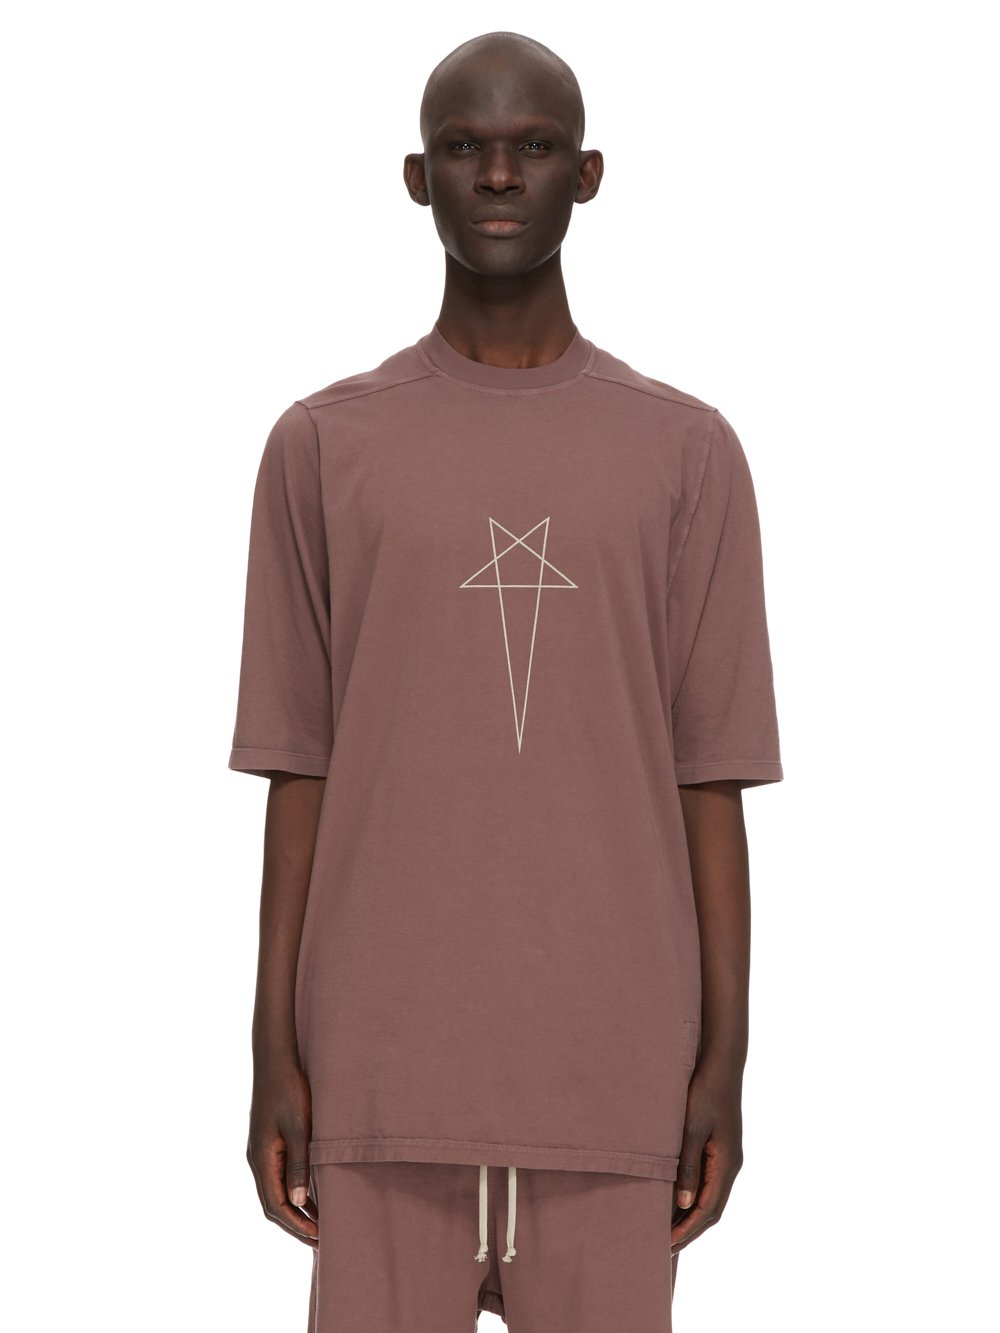 DRKSHDW FW23 LUXOR JUMBO SS T IN MAUVE AND PEARL MEDIUM WEIGHT COTTON JERSEY